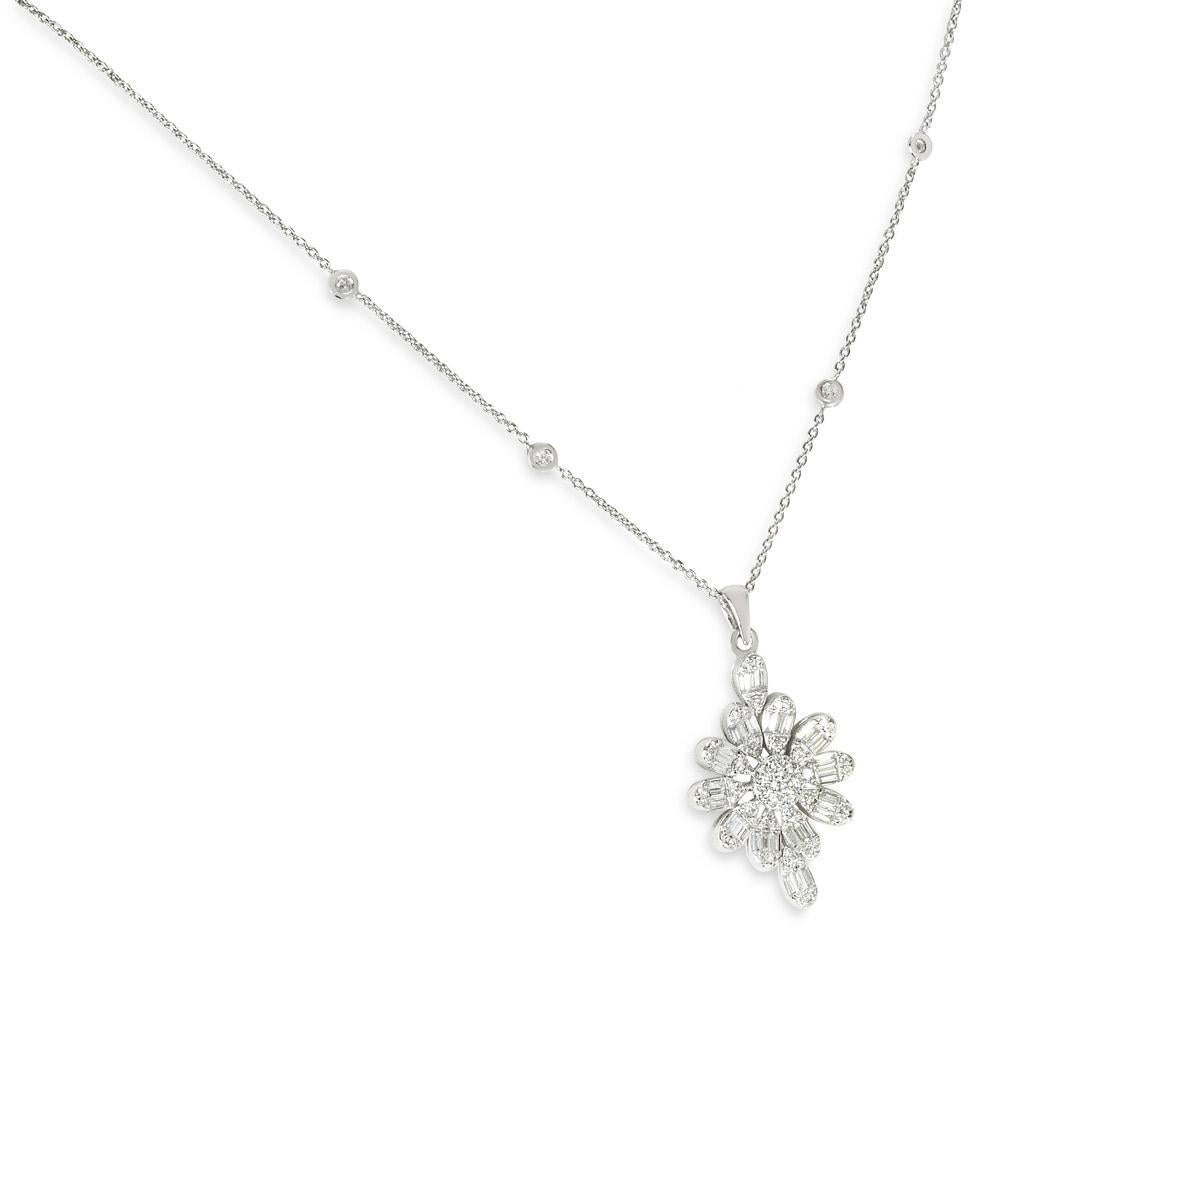 A beautiful 18k white gold diamond pendant. The pendant features a floral design set with 36 baguette cut diamonds and 44 round brilliant cut diamonds with an approximate total weight of 0.82ct, F-G colour and VS clarity. The pendant measures 3.4cm